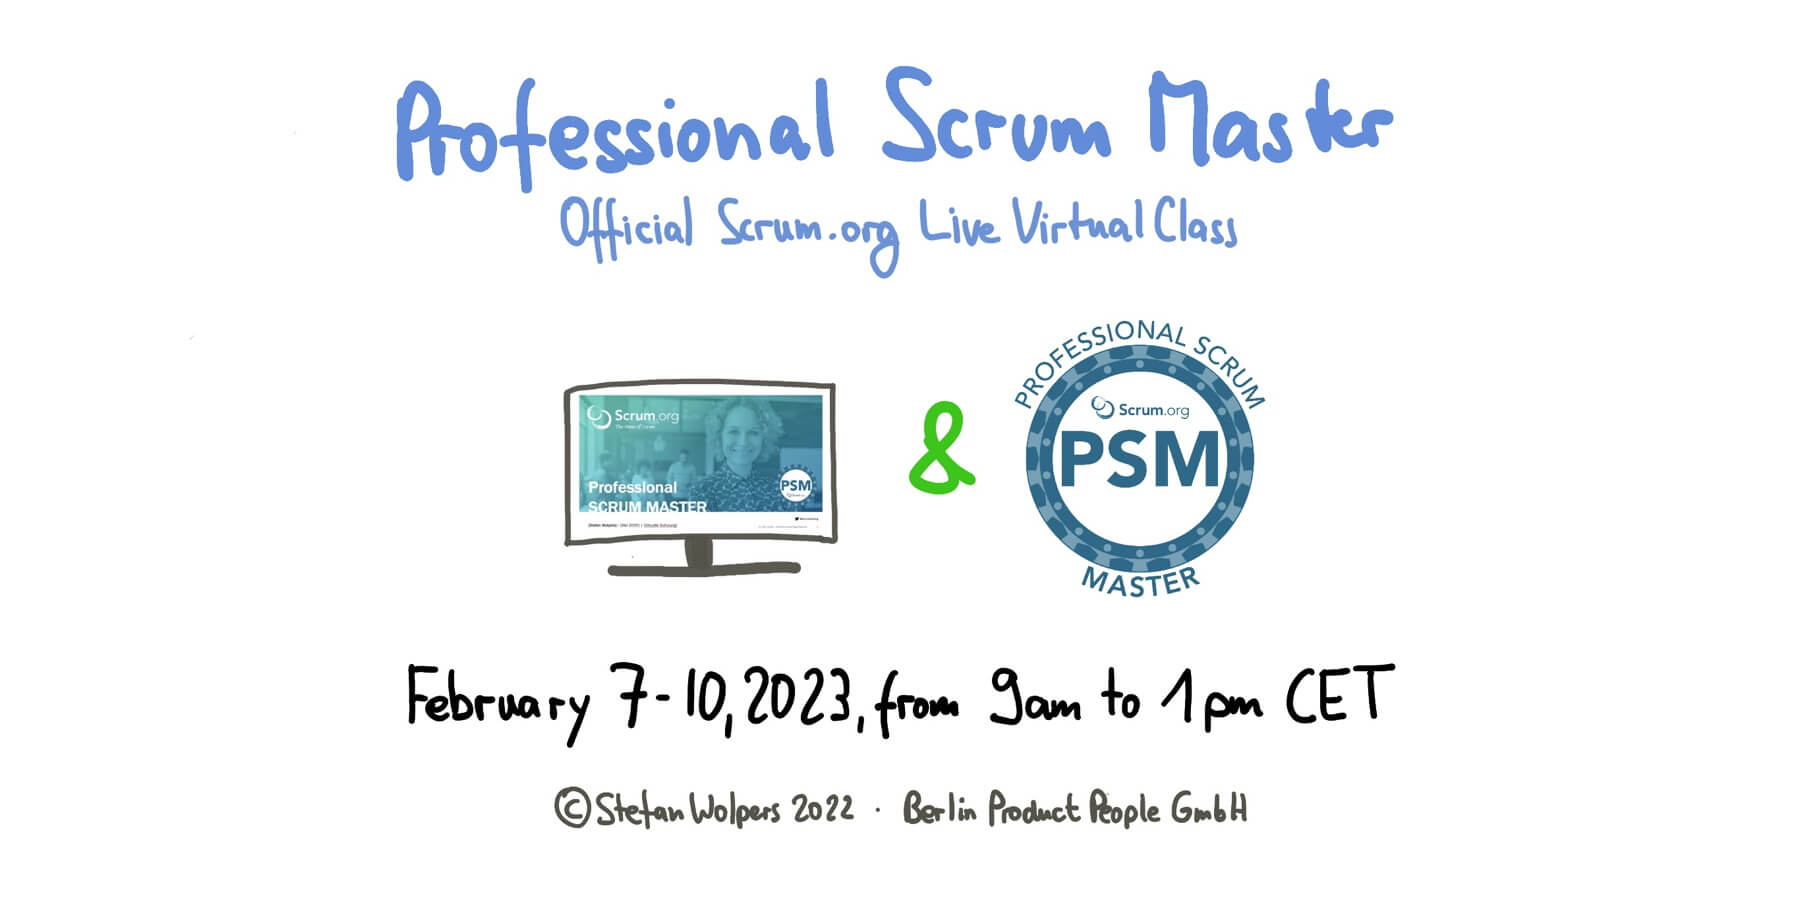 Professional Scrum Master Online Training PSM I Certificate February 2023 — Berlin Product People GmbH — BER-92